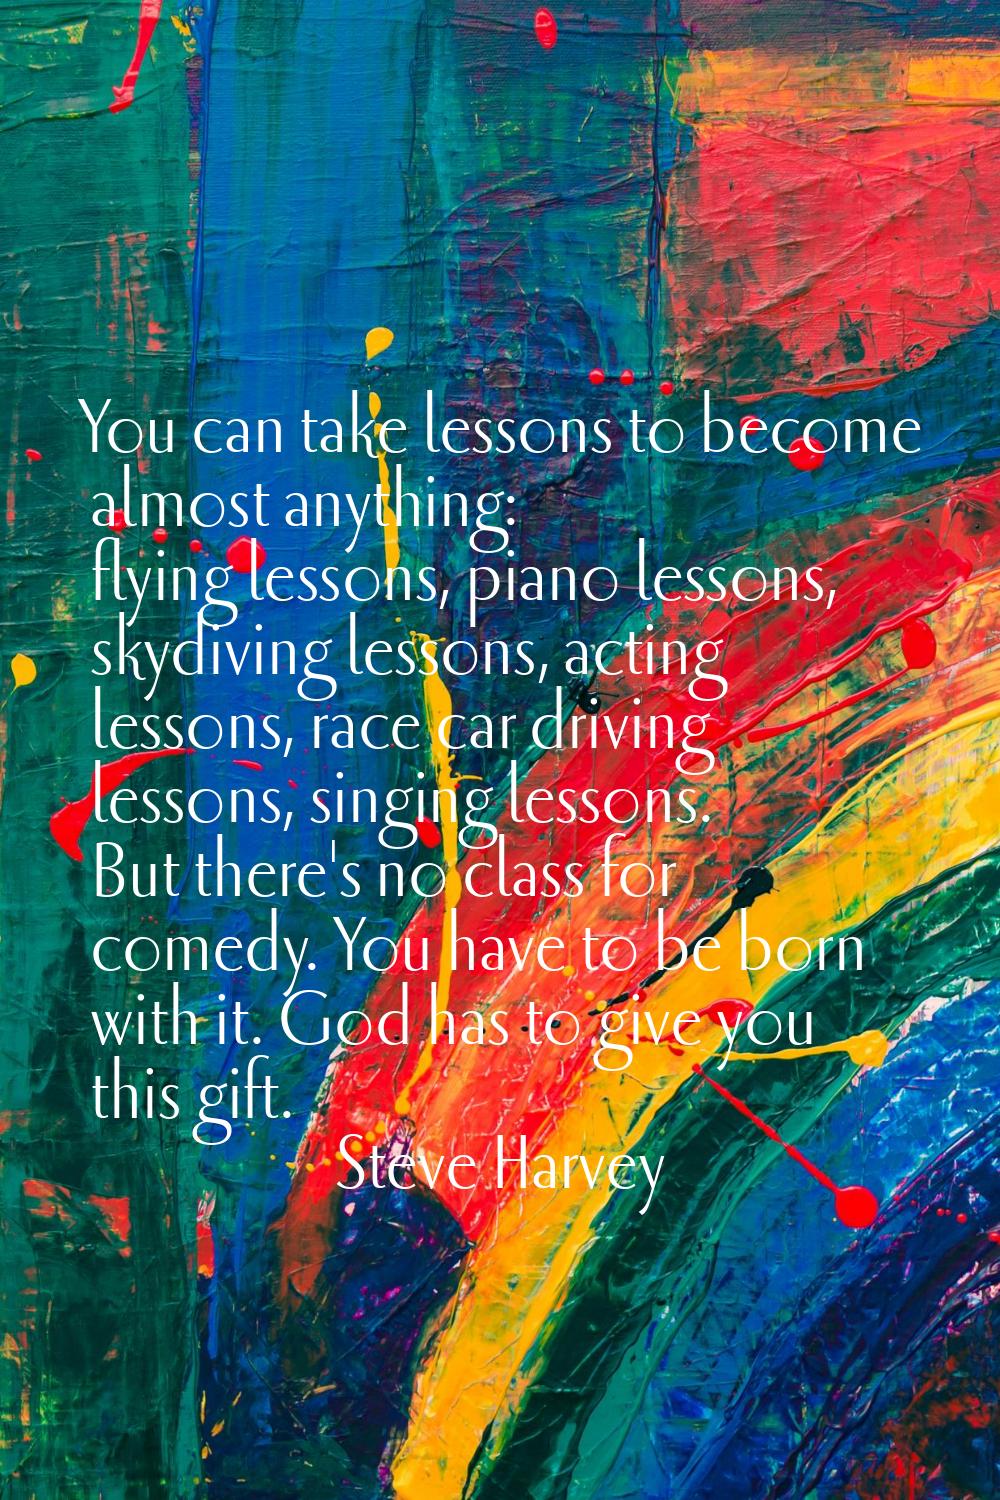 You can take lessons to become almost anything: flying lessons, piano lessons, skydiving lessons, a